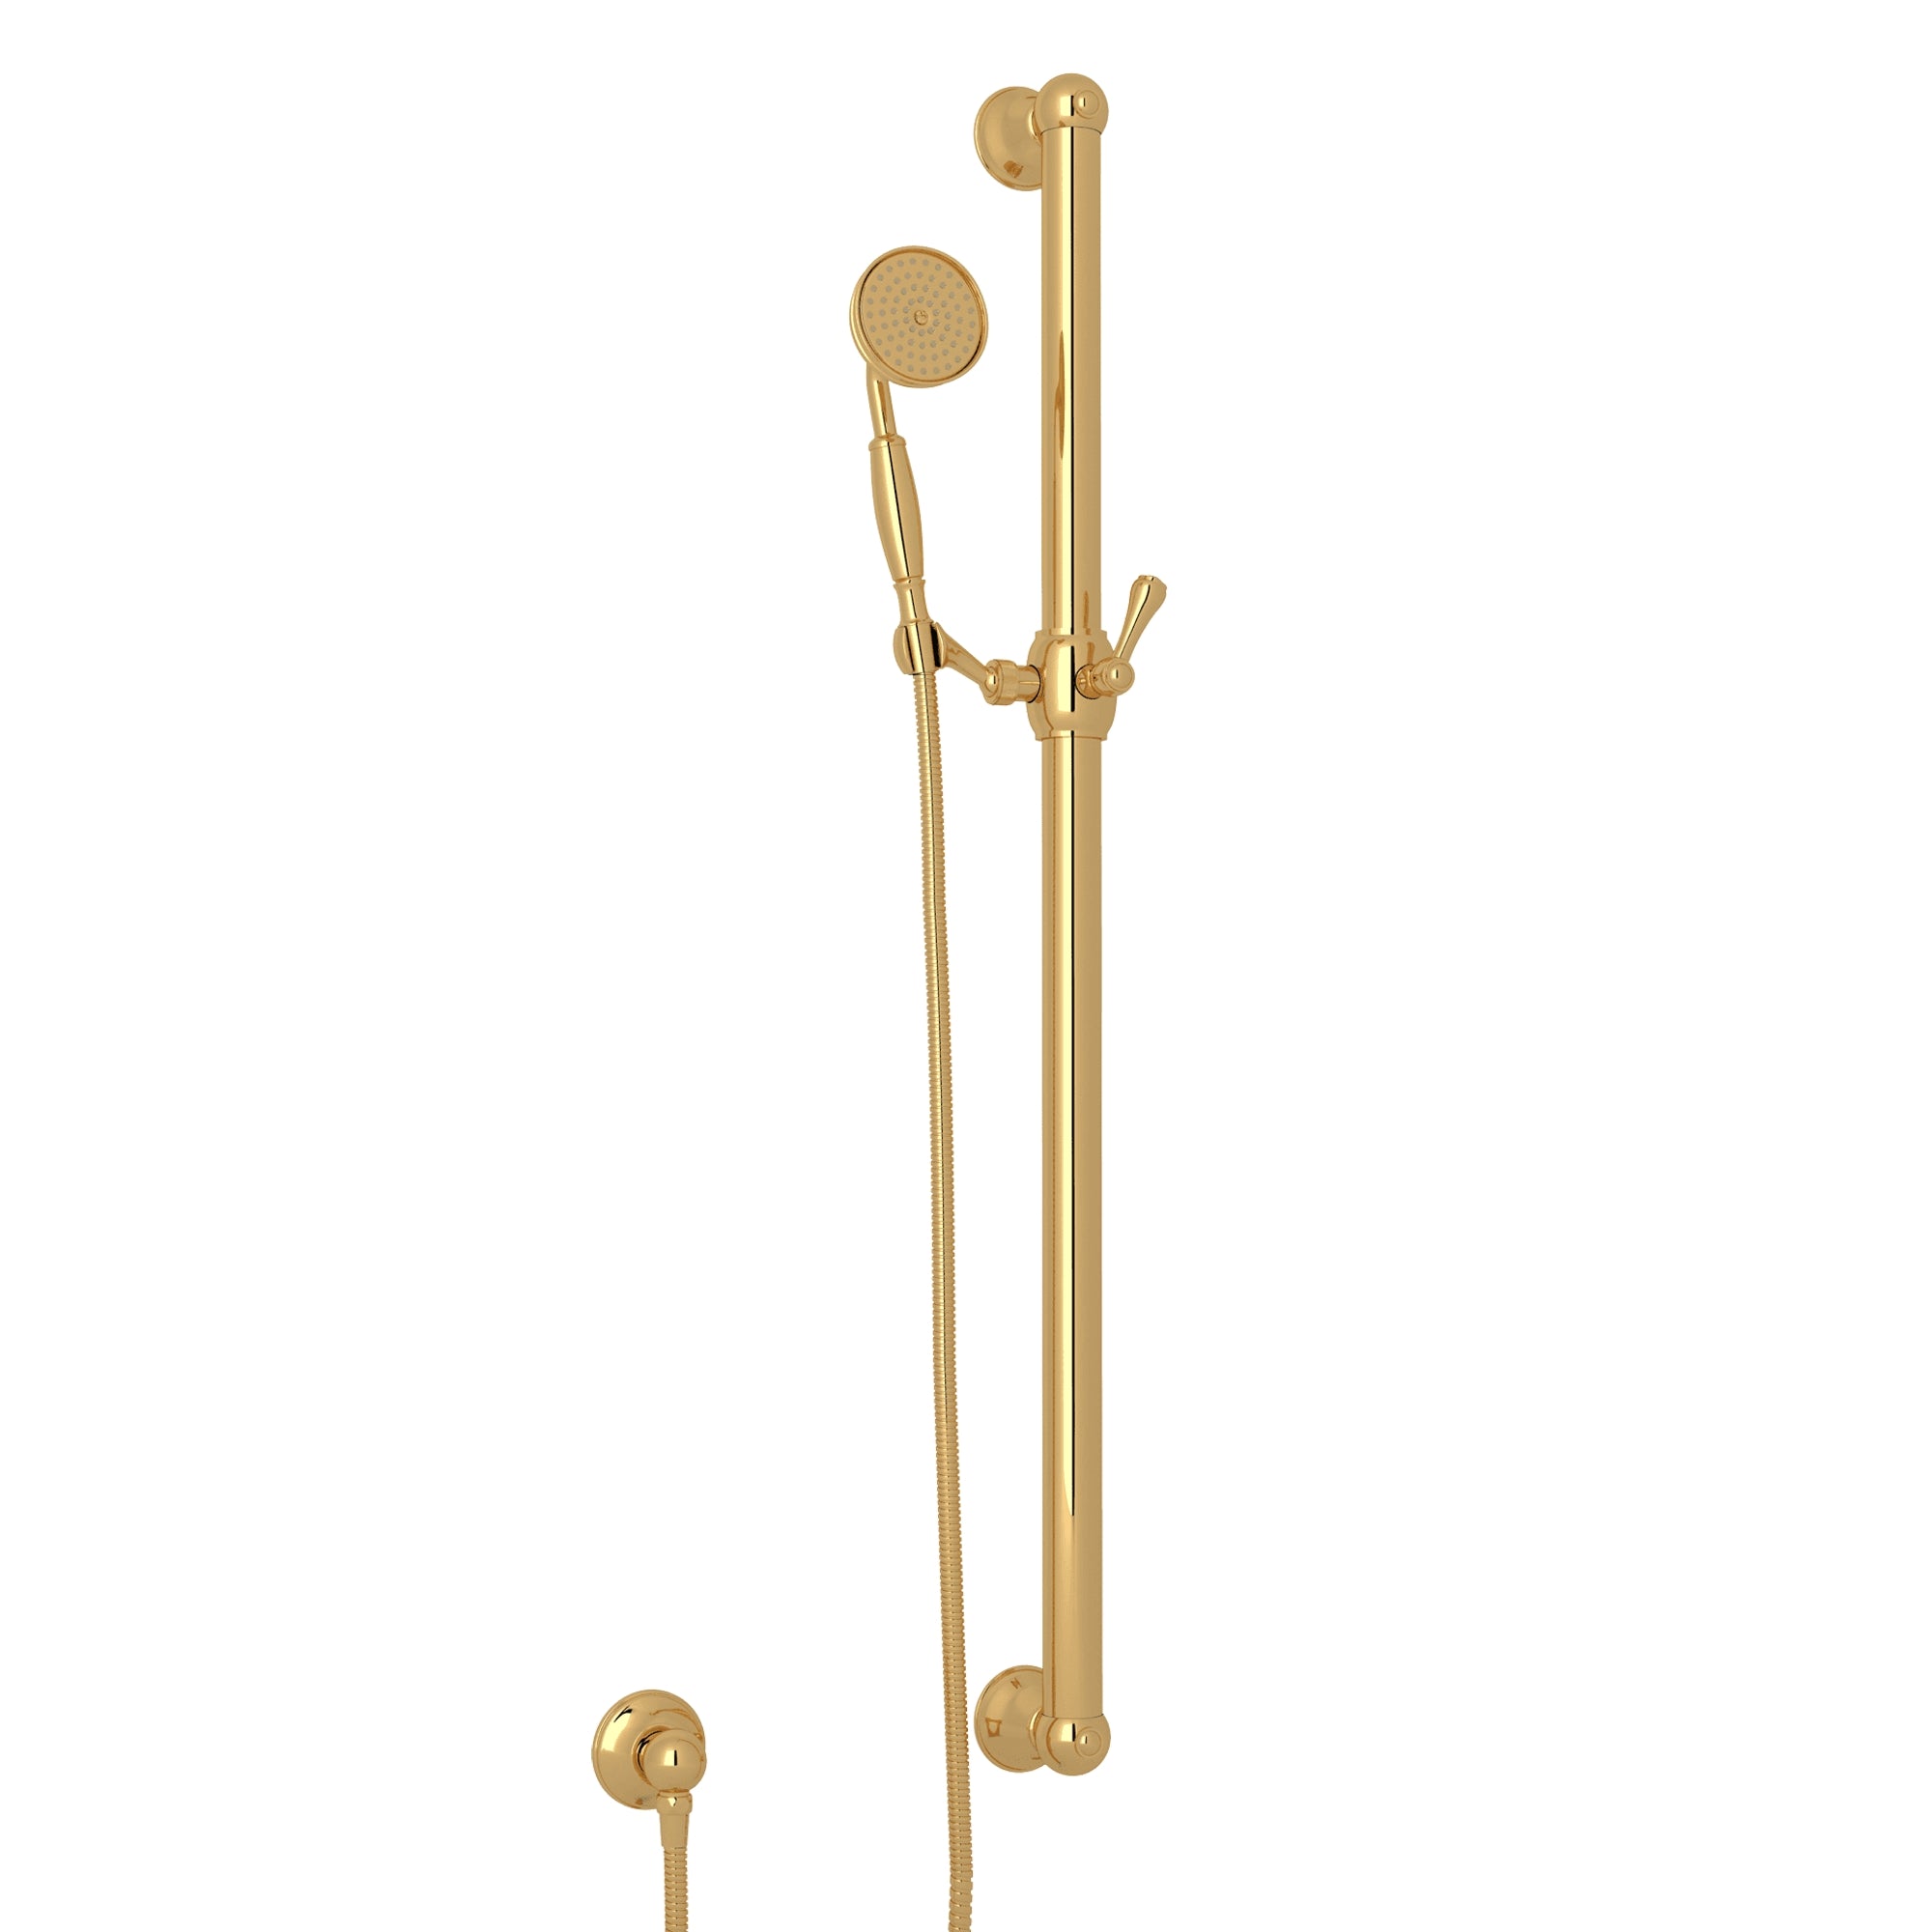 ROHL 1272E Handshower Set With 39" Grab Bar and Single Function Handshower